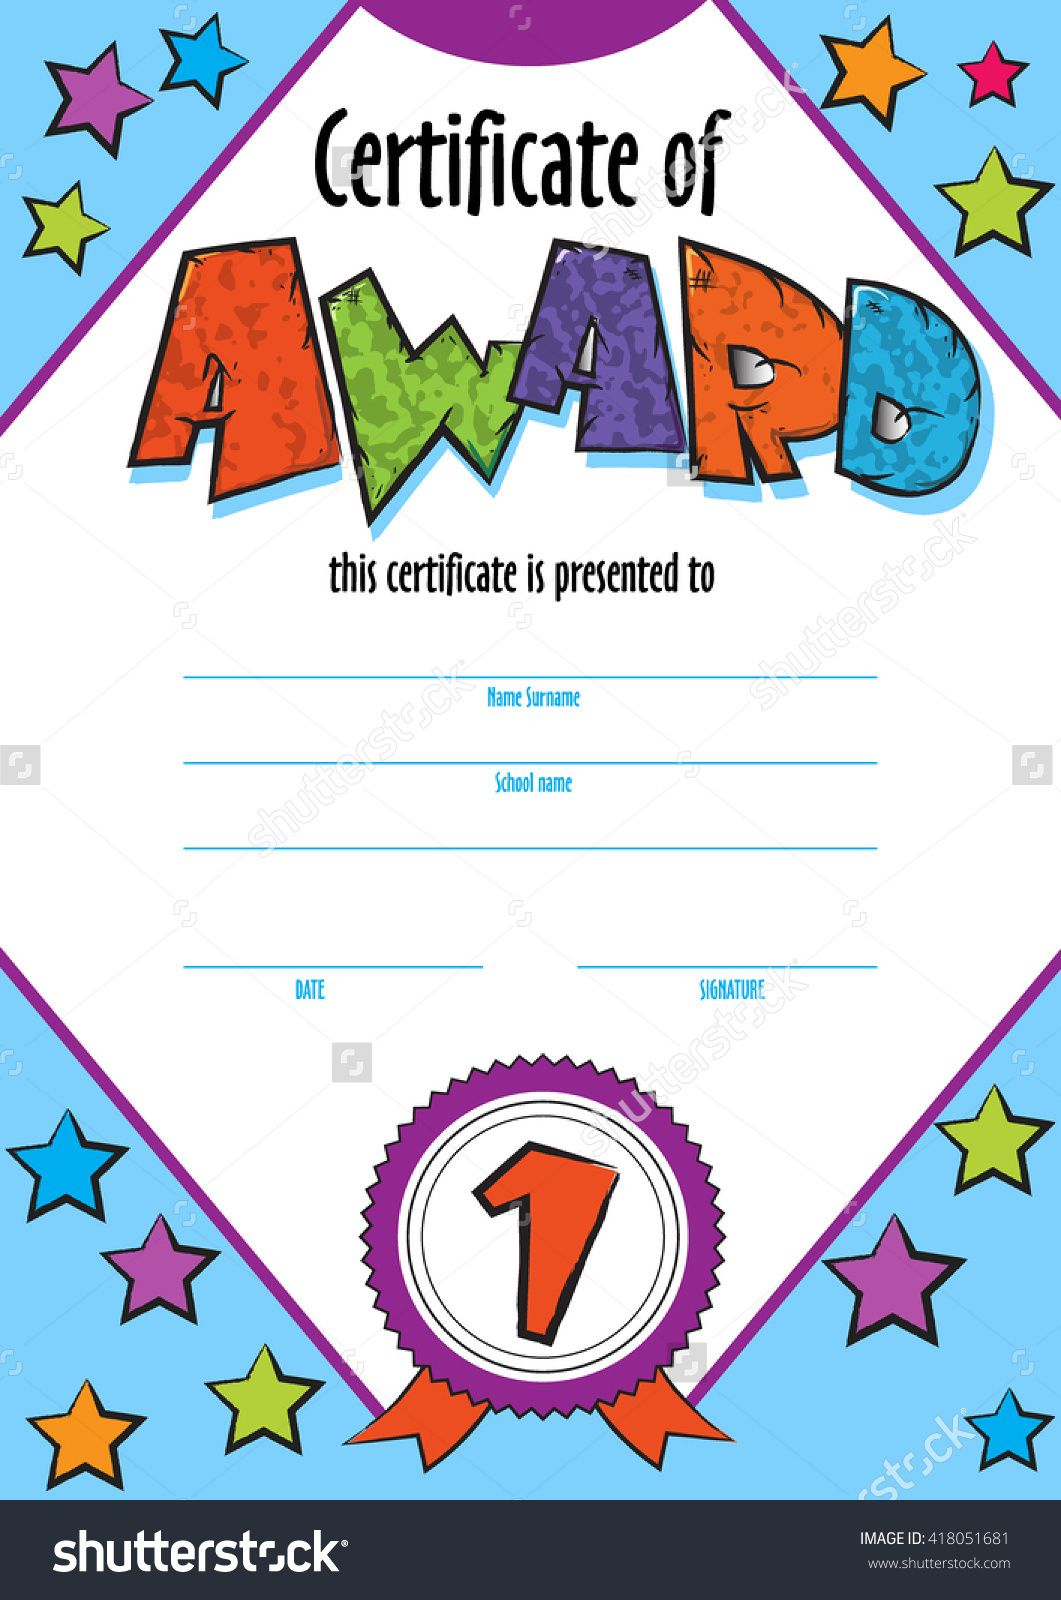 Template Child Certificate To Be Awarded. Kindergarten Intended For Free Kids Certificate Templates